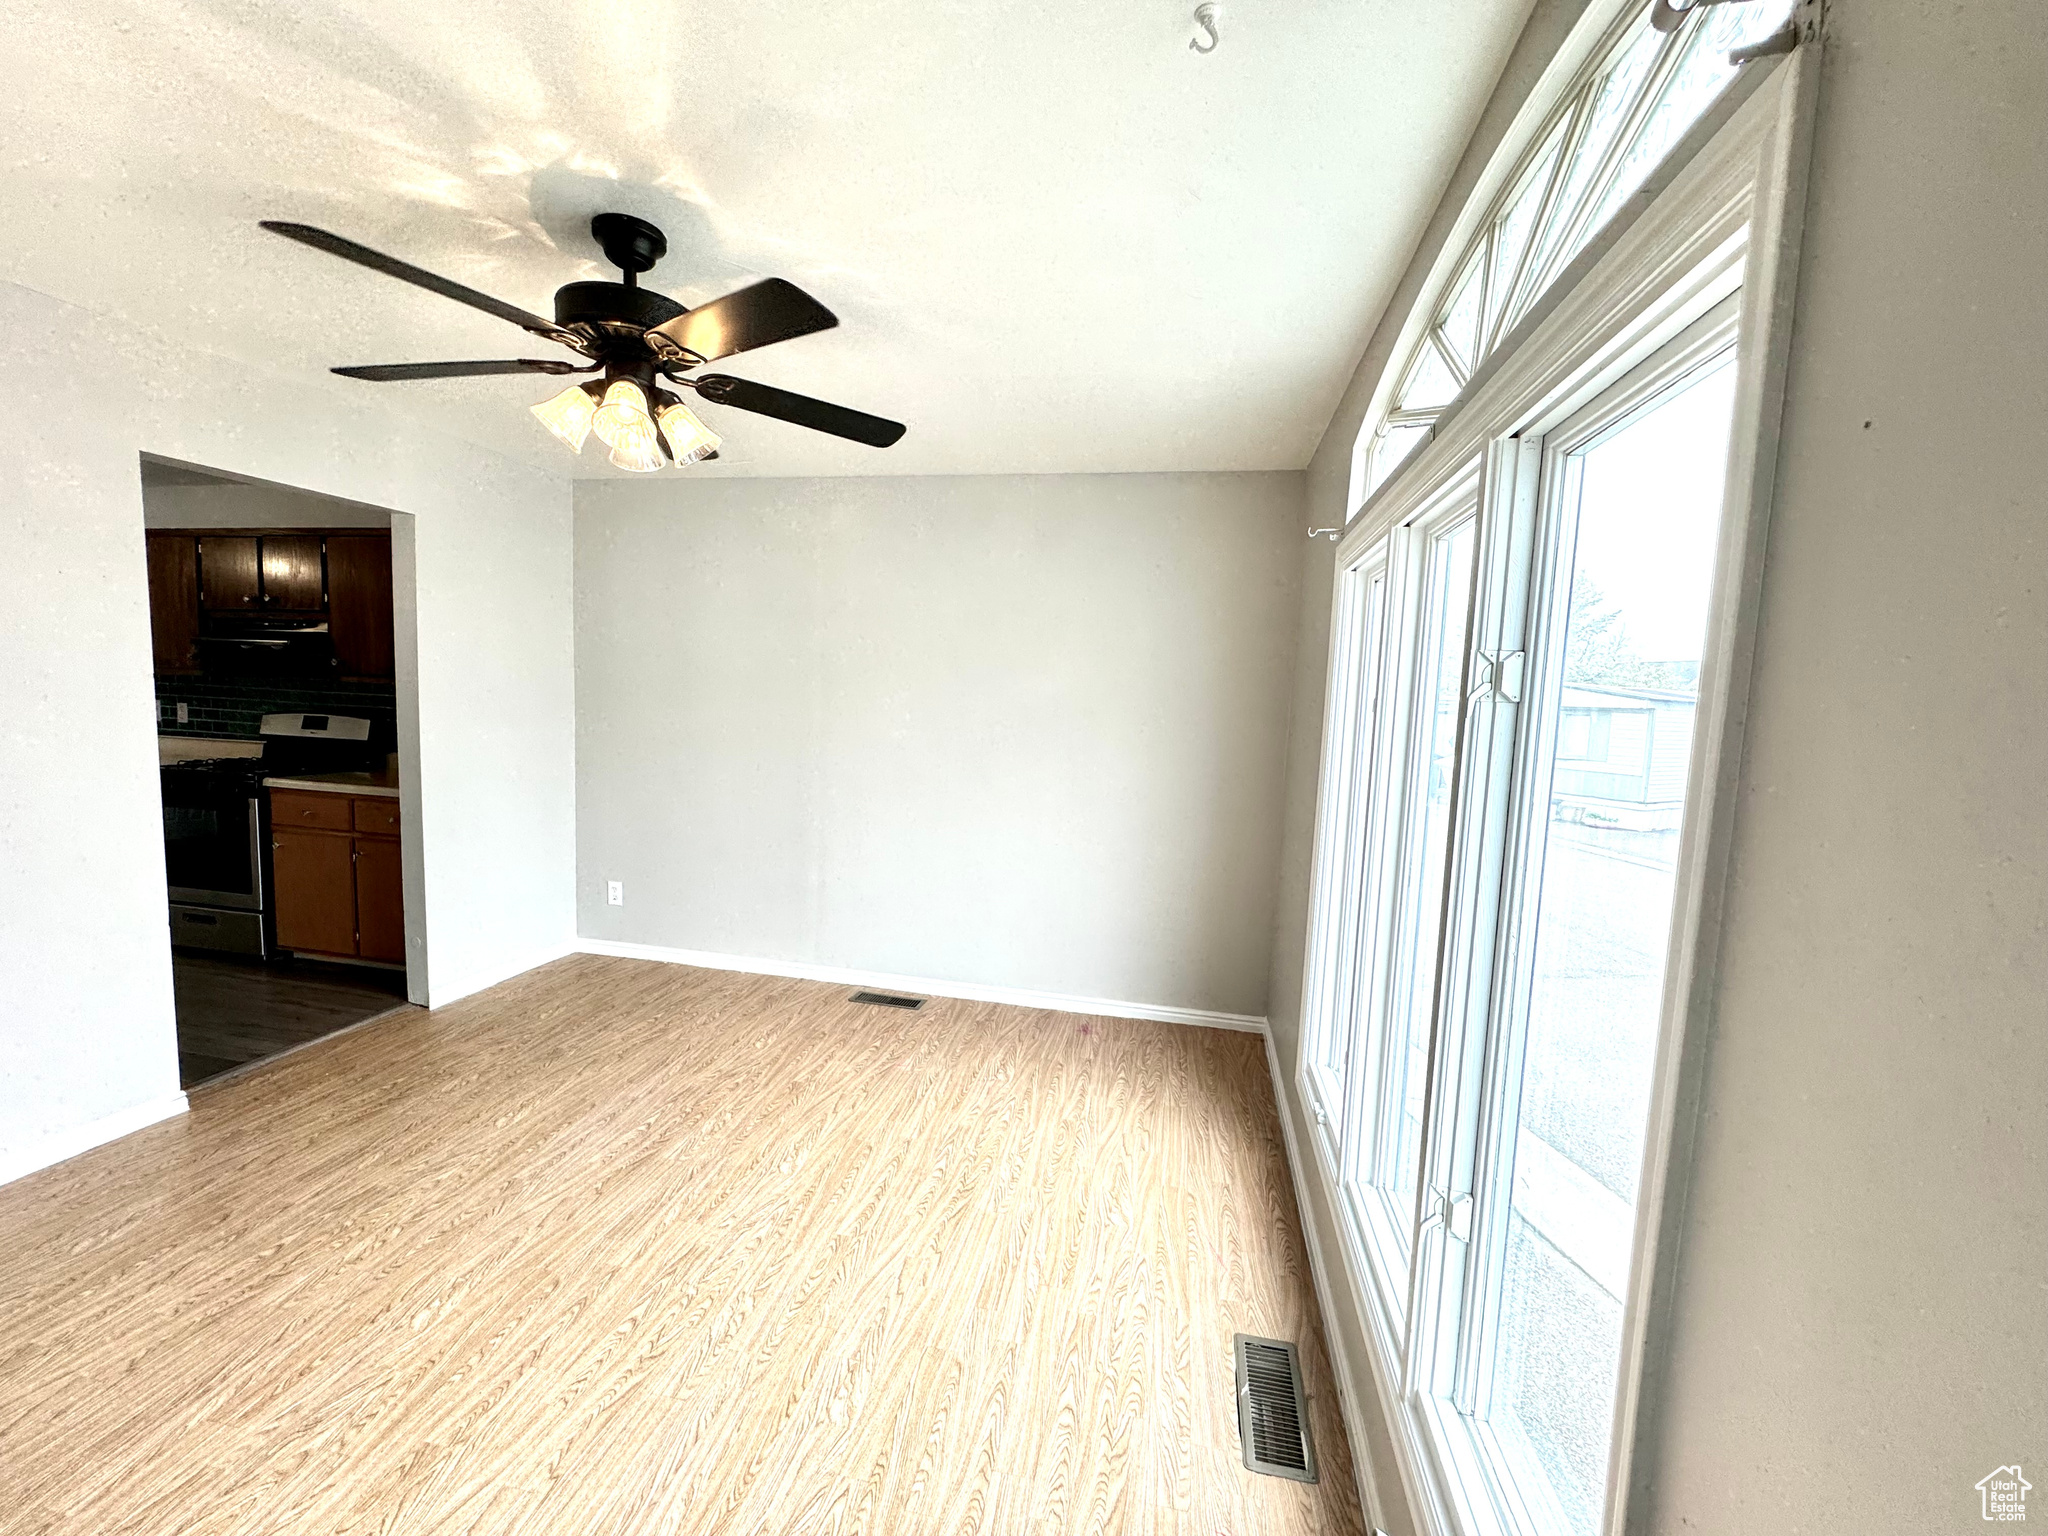 Primary Suite hardwood / wood-style floors and ceiling fan